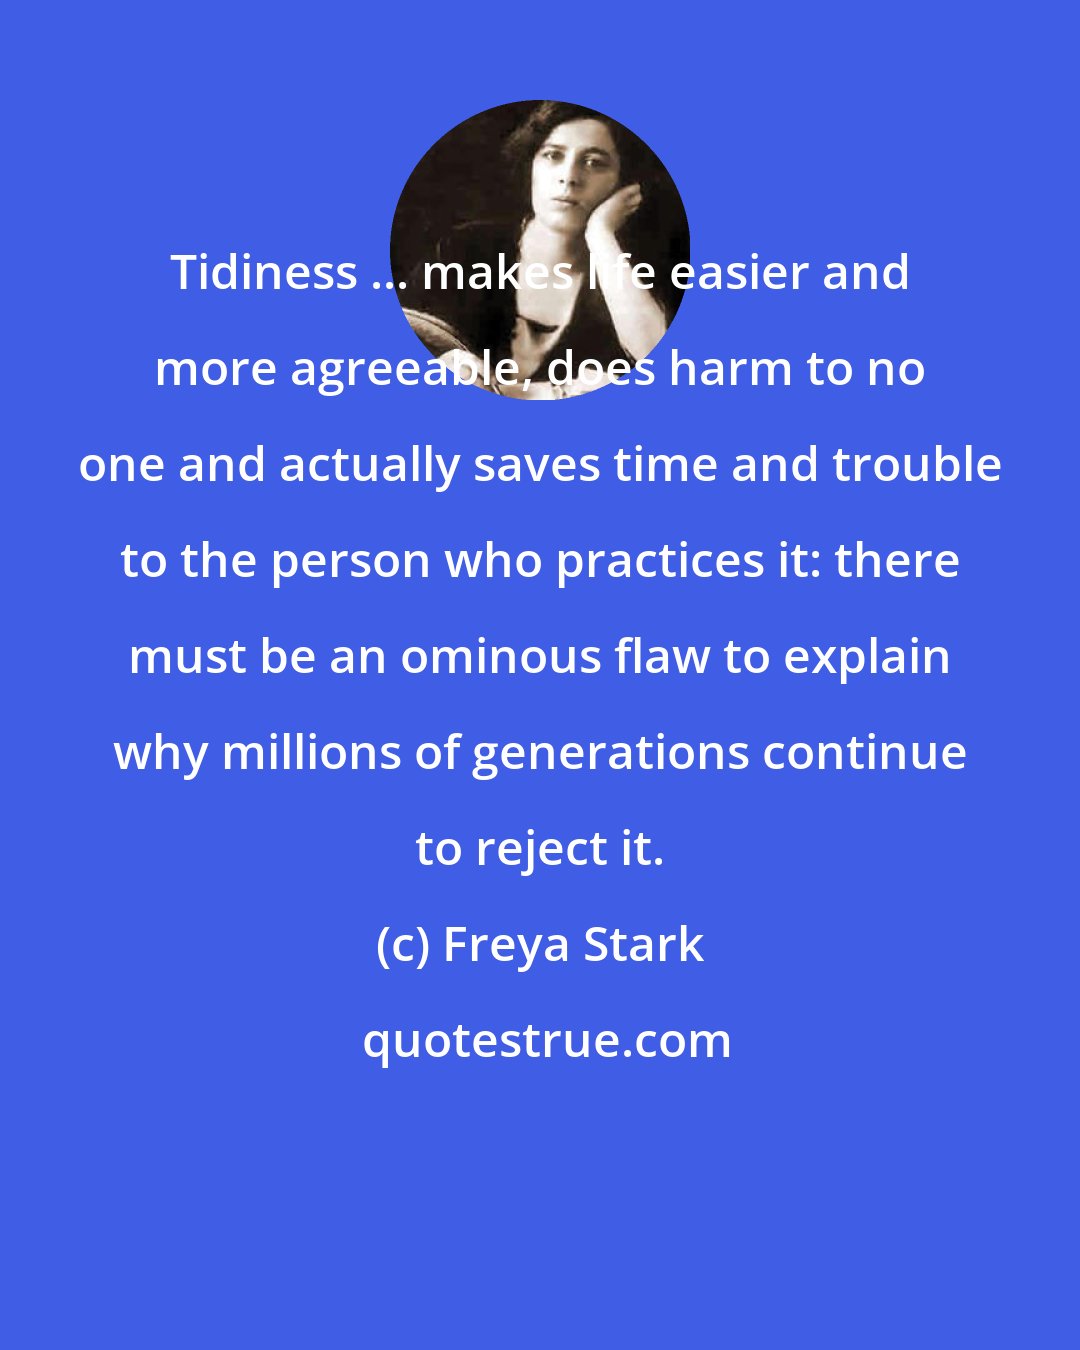 Freya Stark: Tidiness ... makes life easier and more agreeable, does harm to no one and actually saves time and trouble to the person who practices it: there must be an ominous flaw to explain why millions of generations continue to reject it.